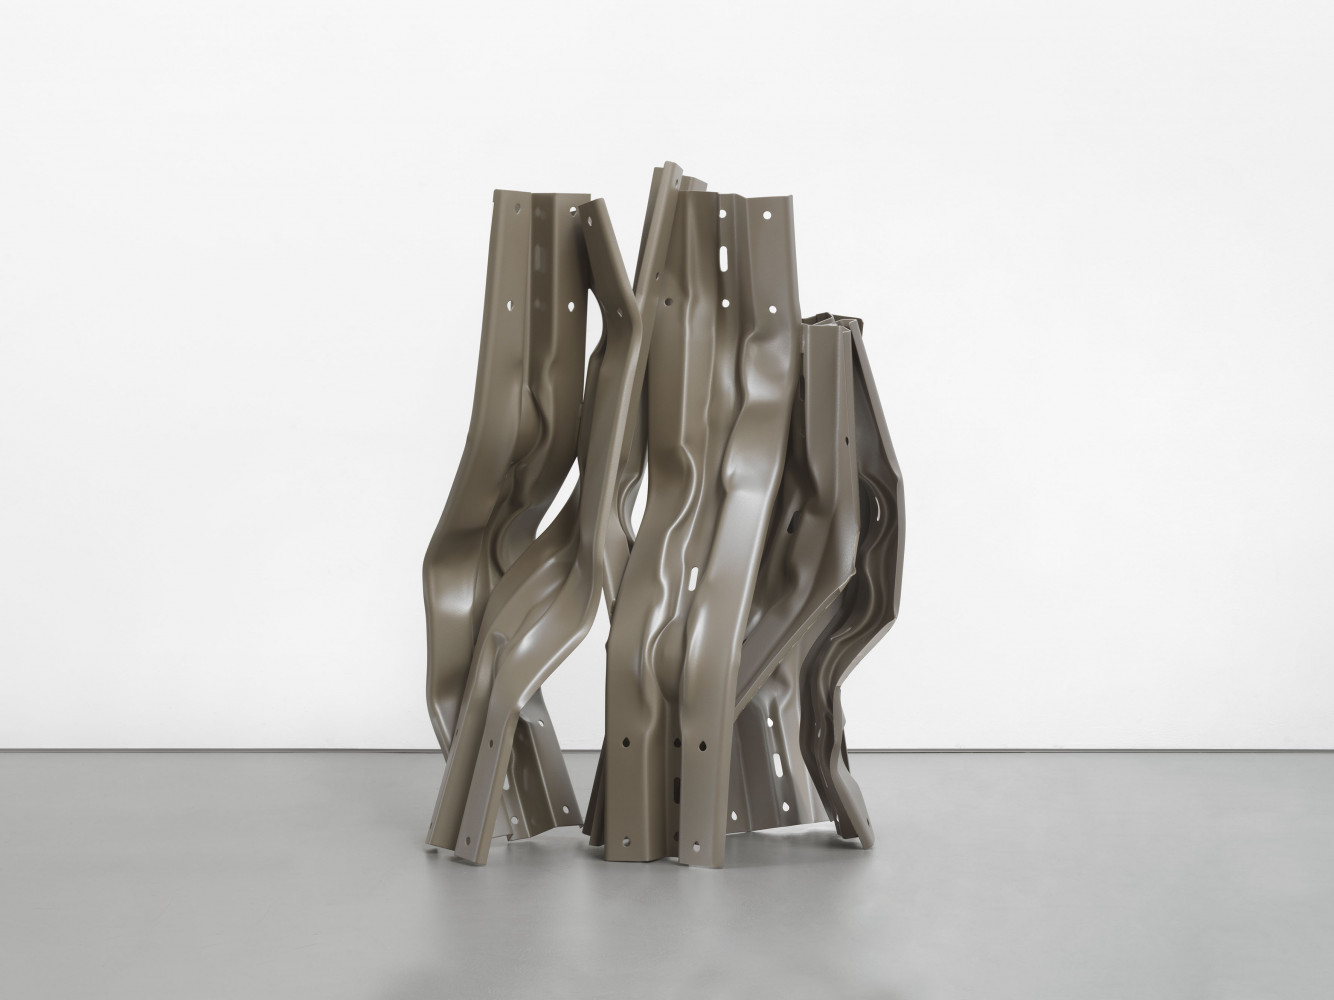 Bettina Pousttchi, ‘Vertical Highways A29’, 2023, Crash barriers, steel